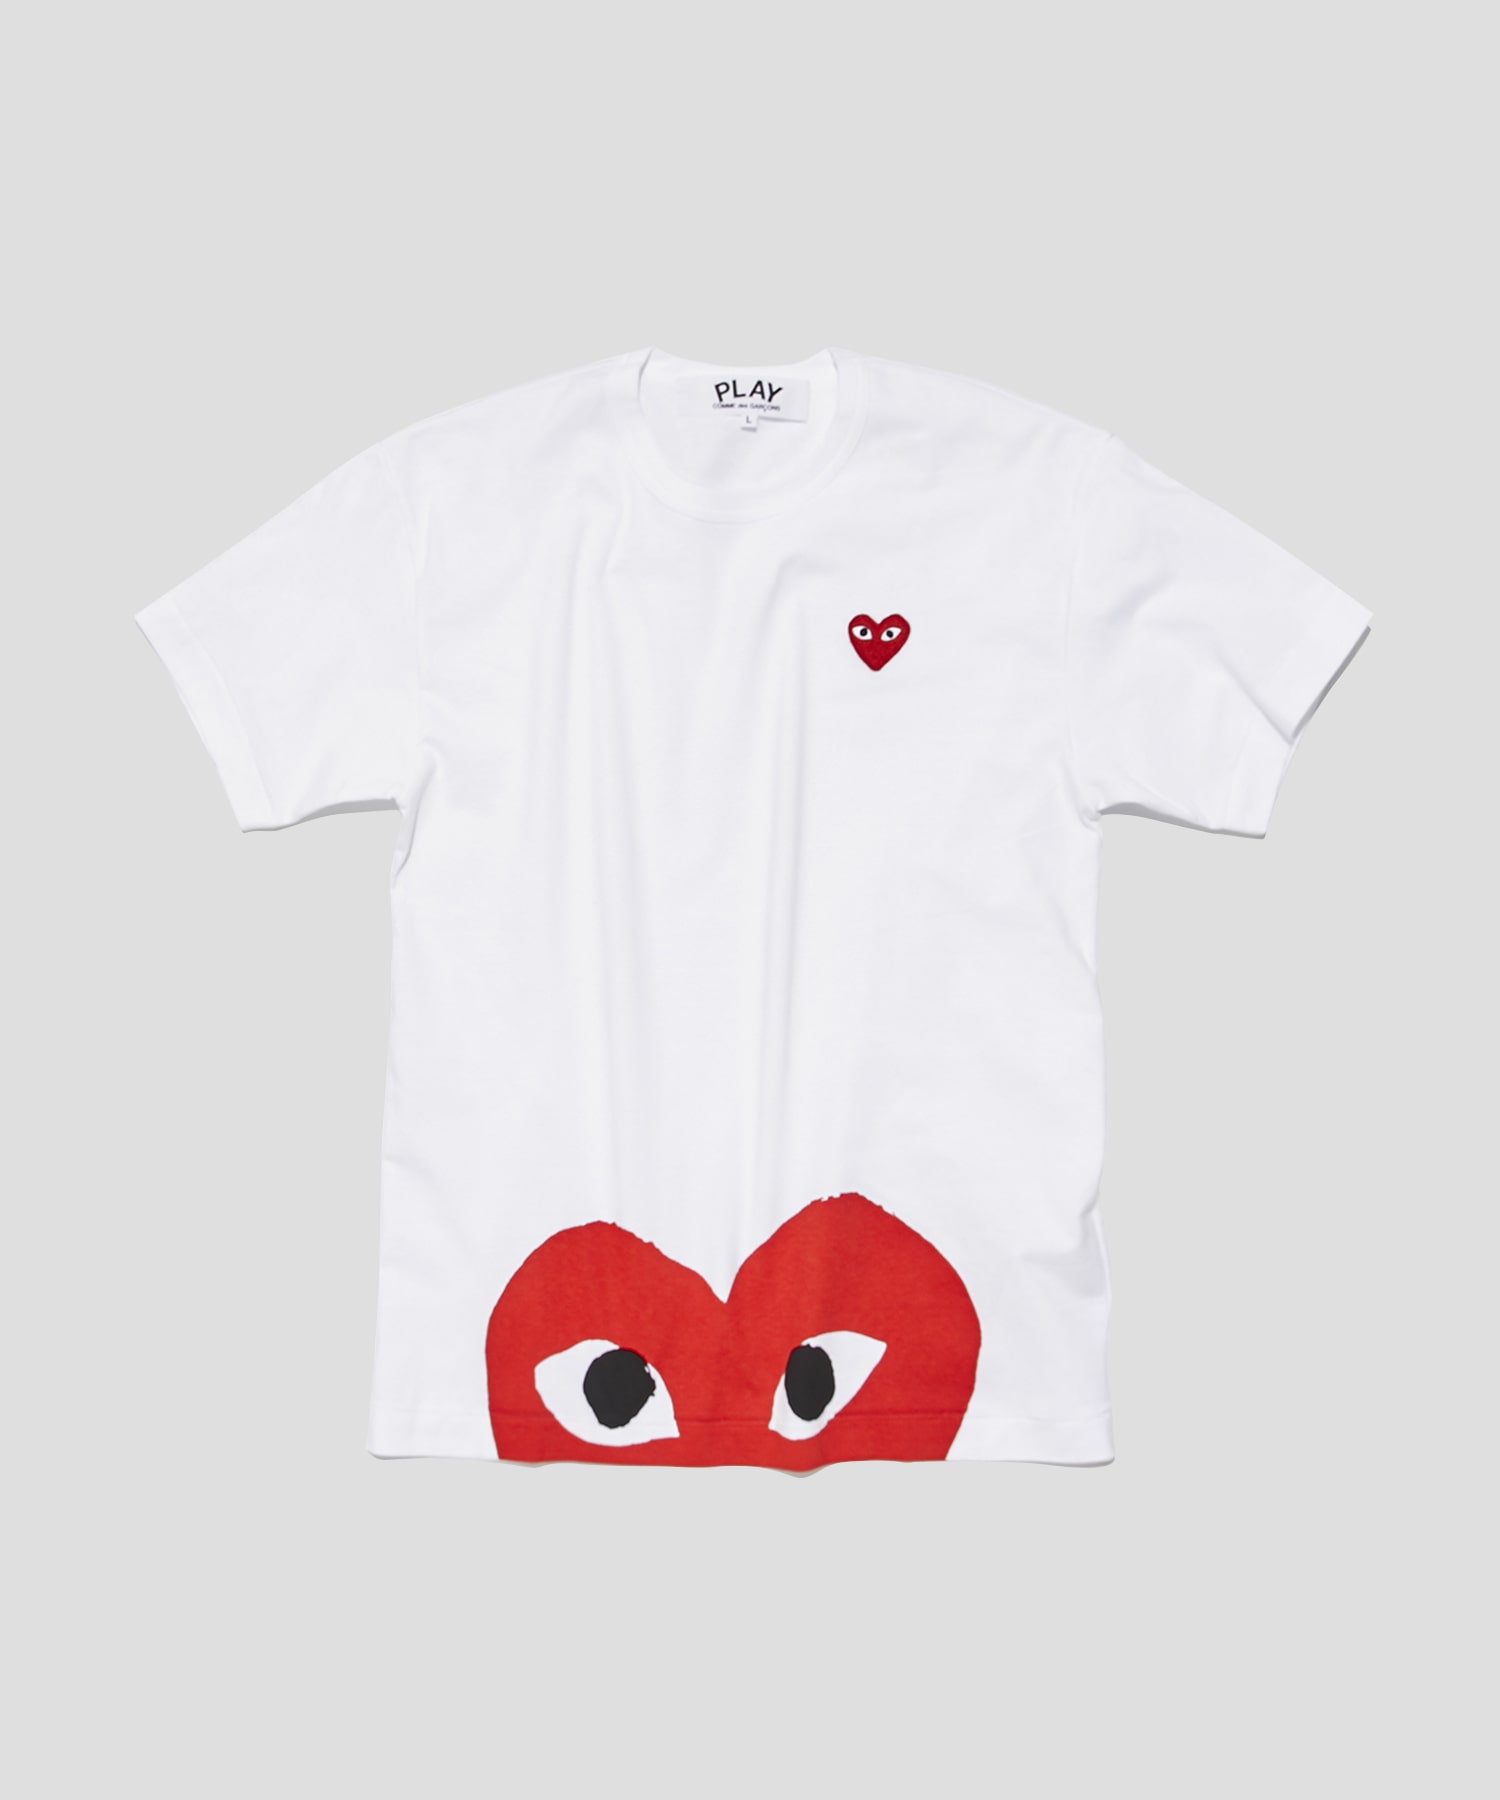 AZ-T034-051 S/S TEE RED HEART(L WHITE): PLAY COMME des GARCONS